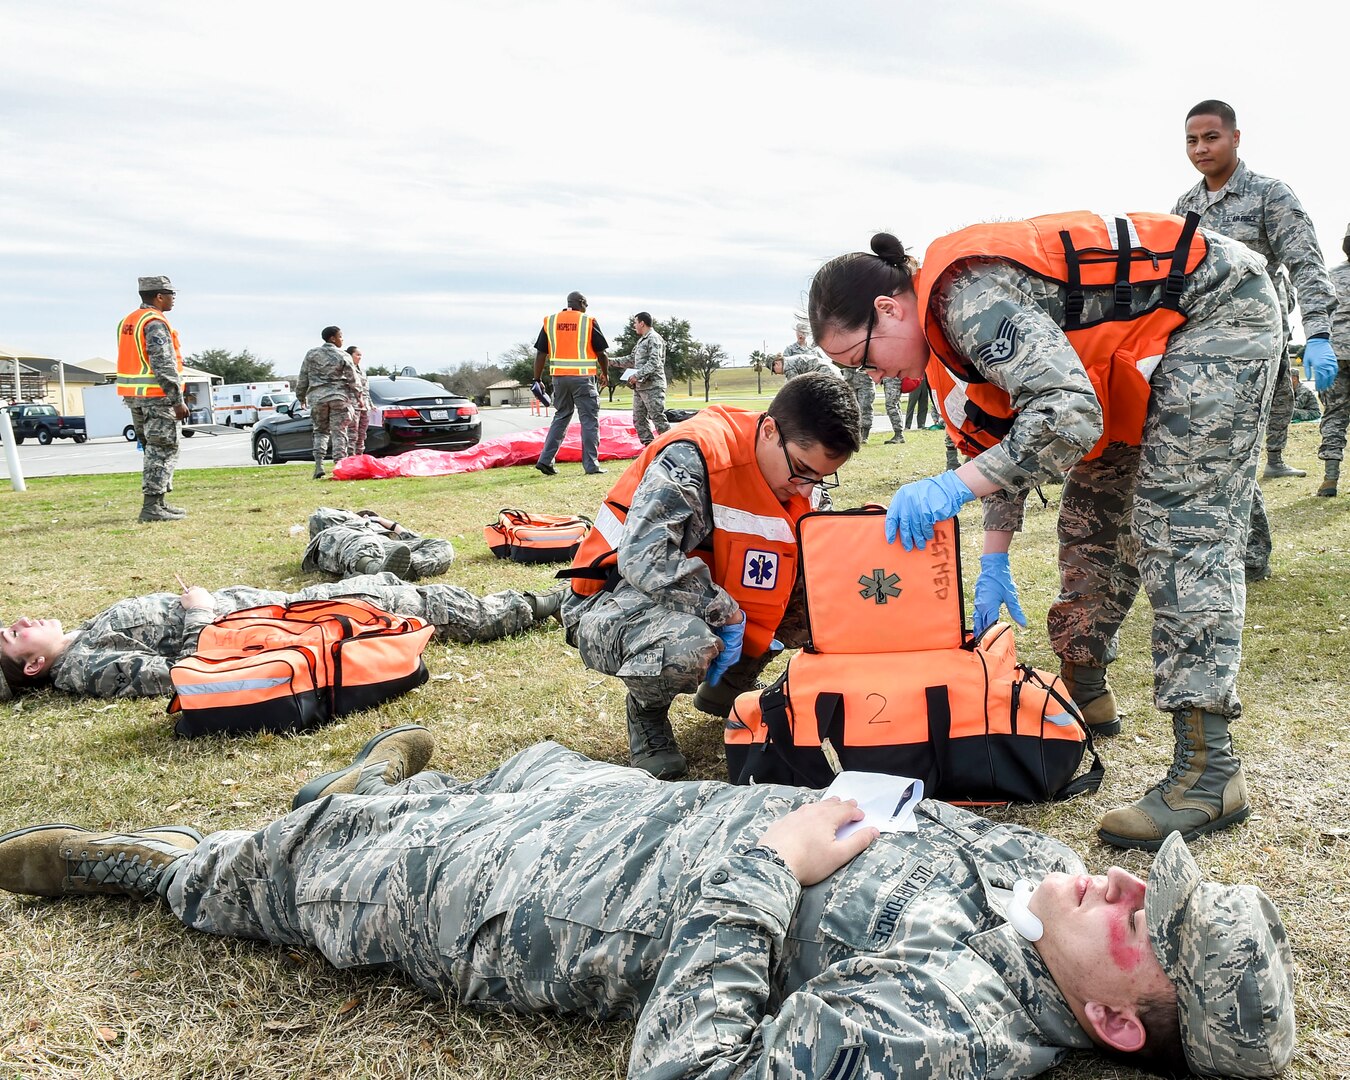 Airmen assess and prepare to triage a simulated patient prior to transport on an awaiting ambulance bus during an improved explosive device emergency response exercise Jan. 25, 2017, on Joint Base San Antonio, Texas-Lackland. The exercise tested the 59th Medical Wing’s clinical and field response teams’ readiness in advent of an on-base mass casualty incident. (U.S. Air Force photo/Staff Sgt. Michael Ellis)